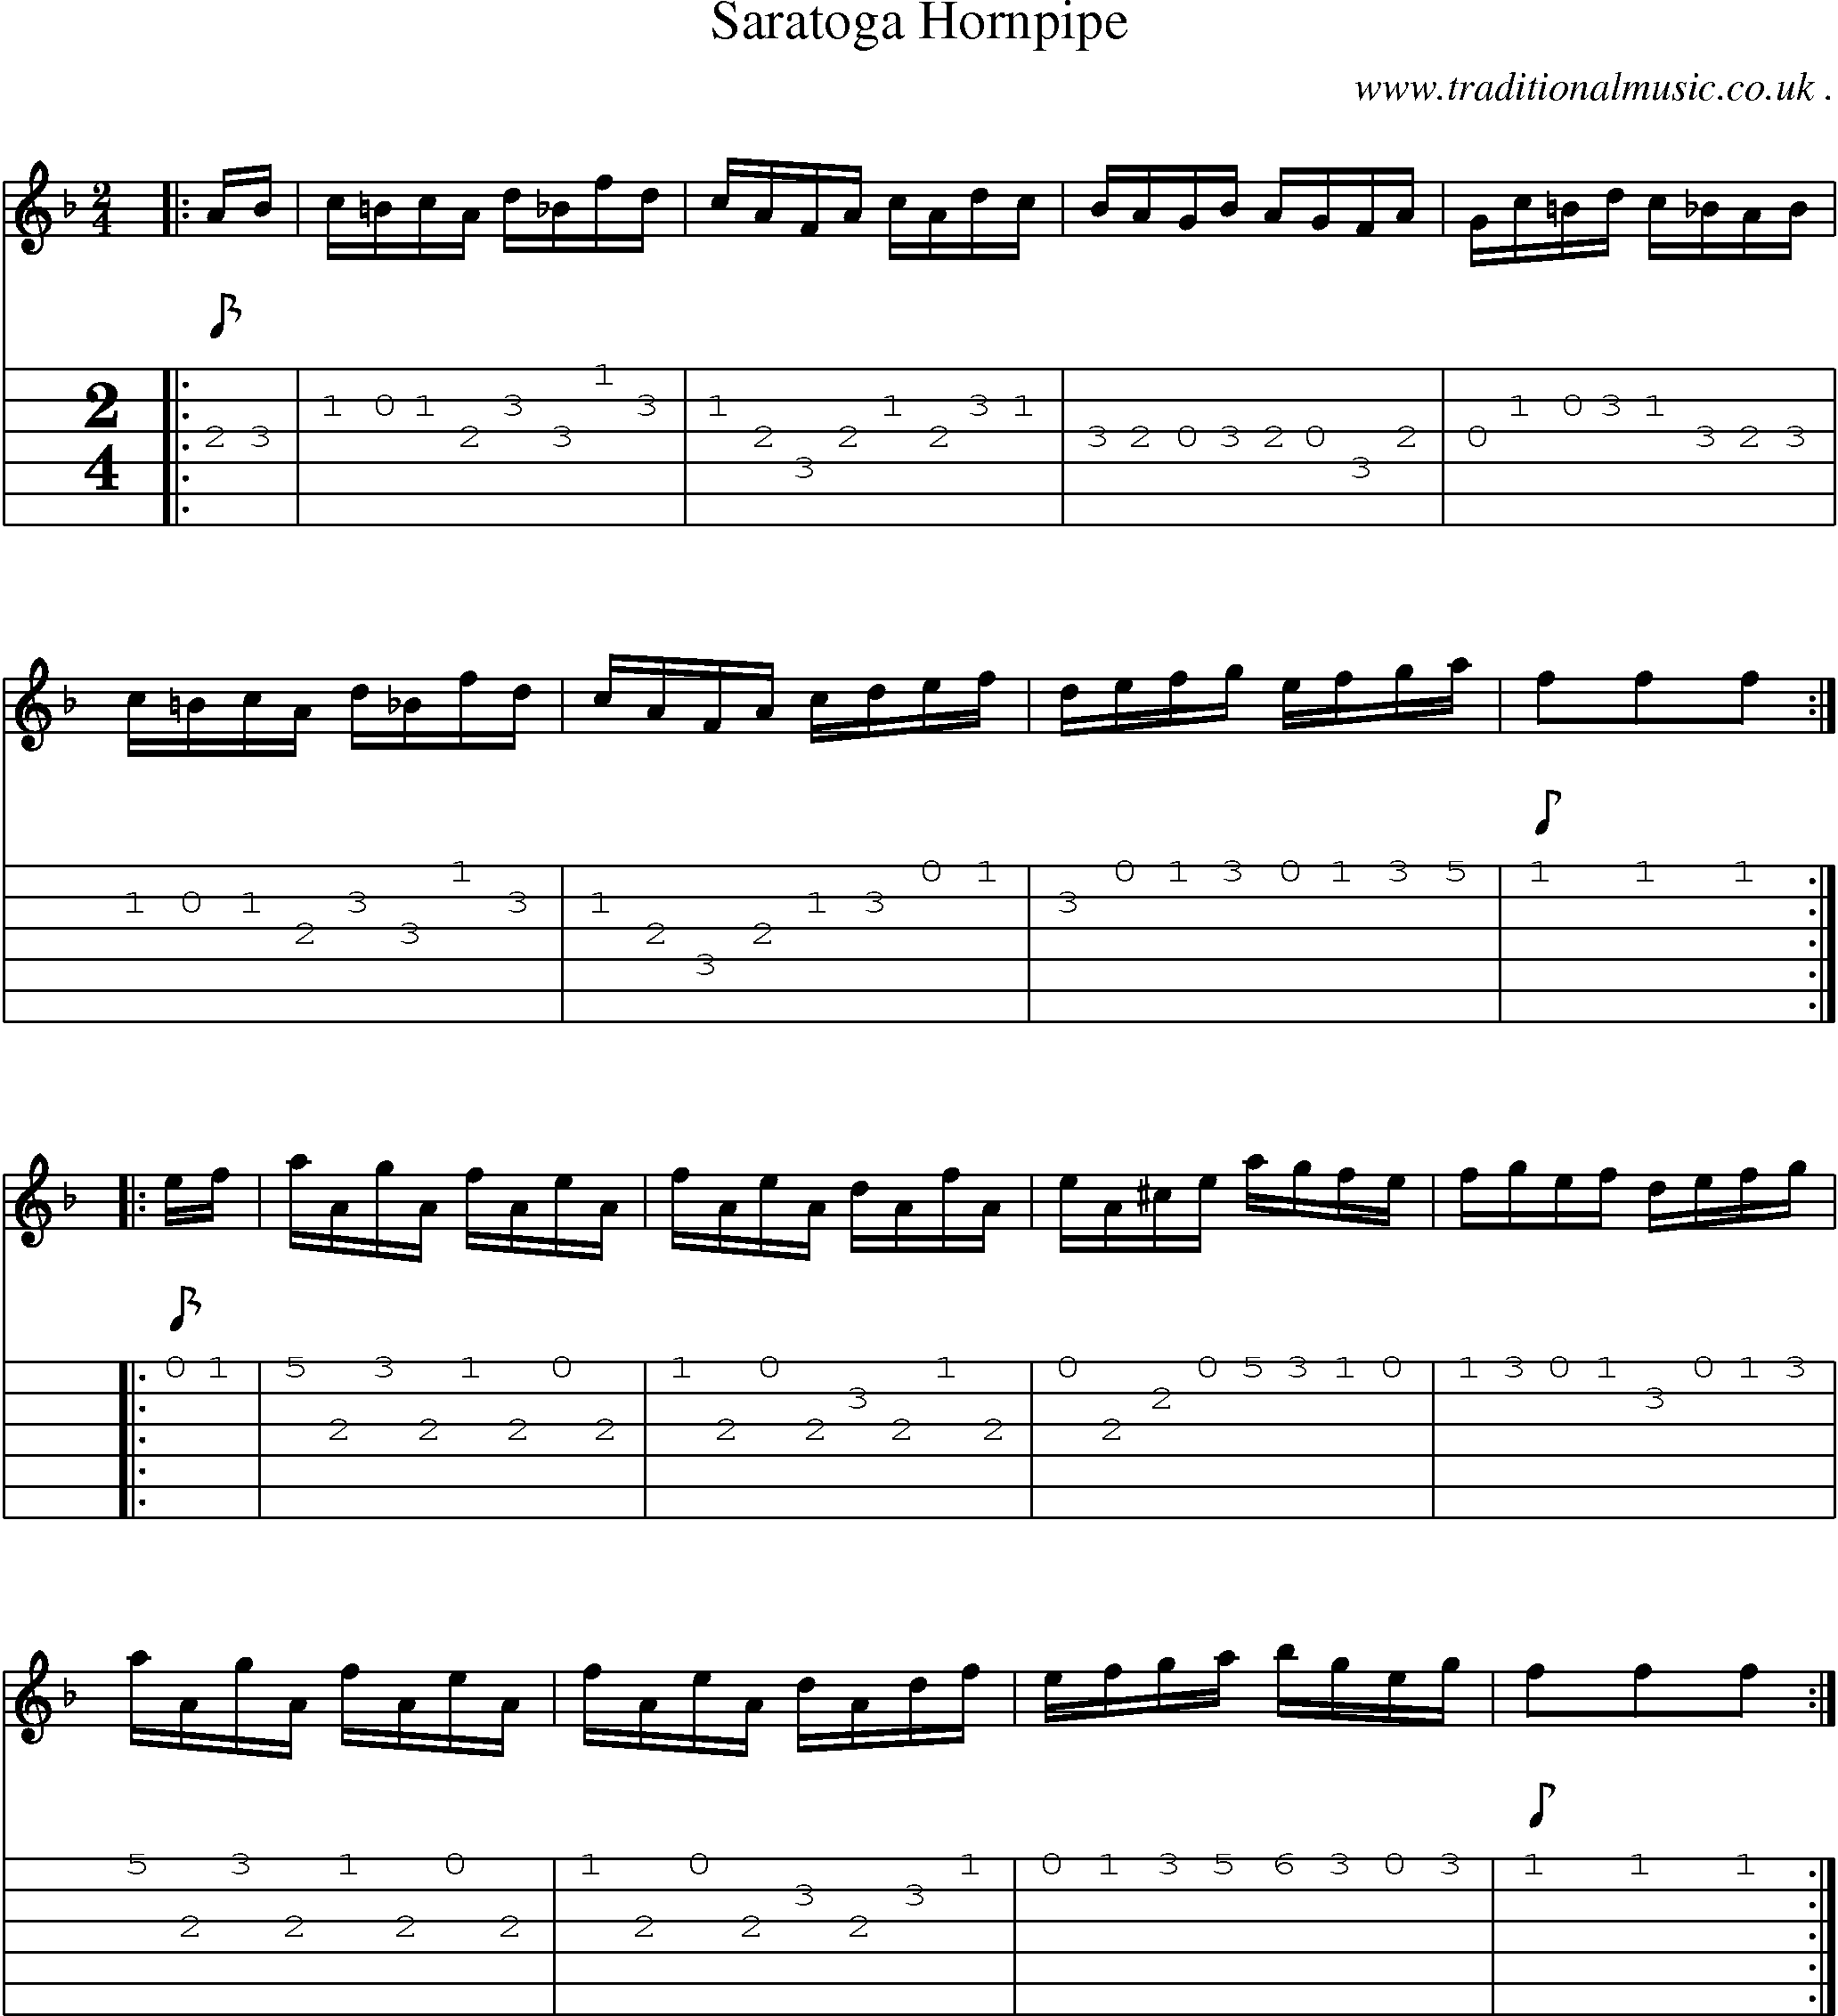 Sheet-Music and Guitar Tabs for Saratoga Hornpipe